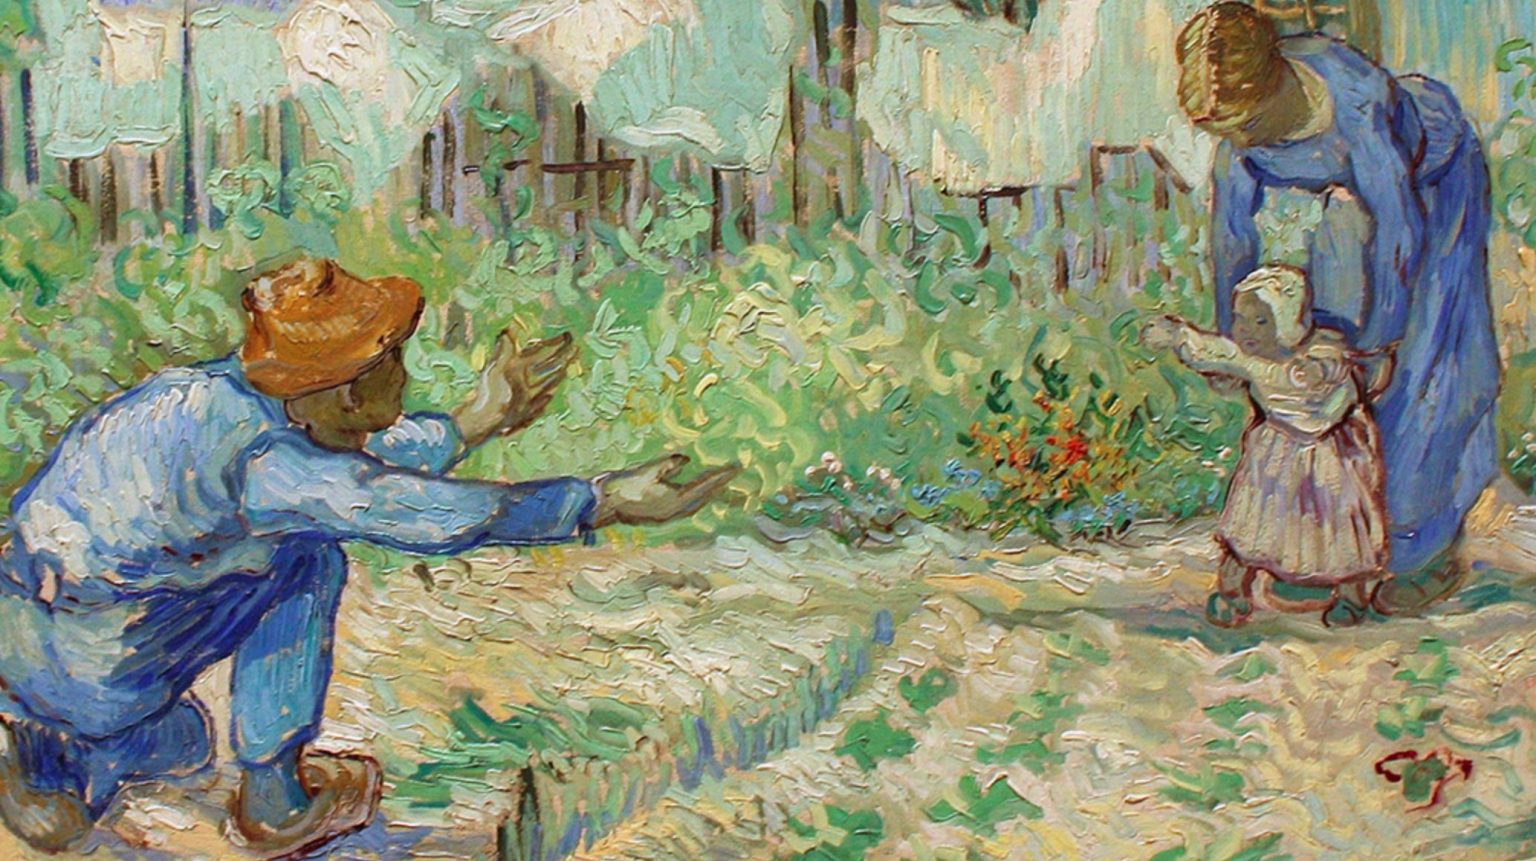 a painting of two people in a garden.